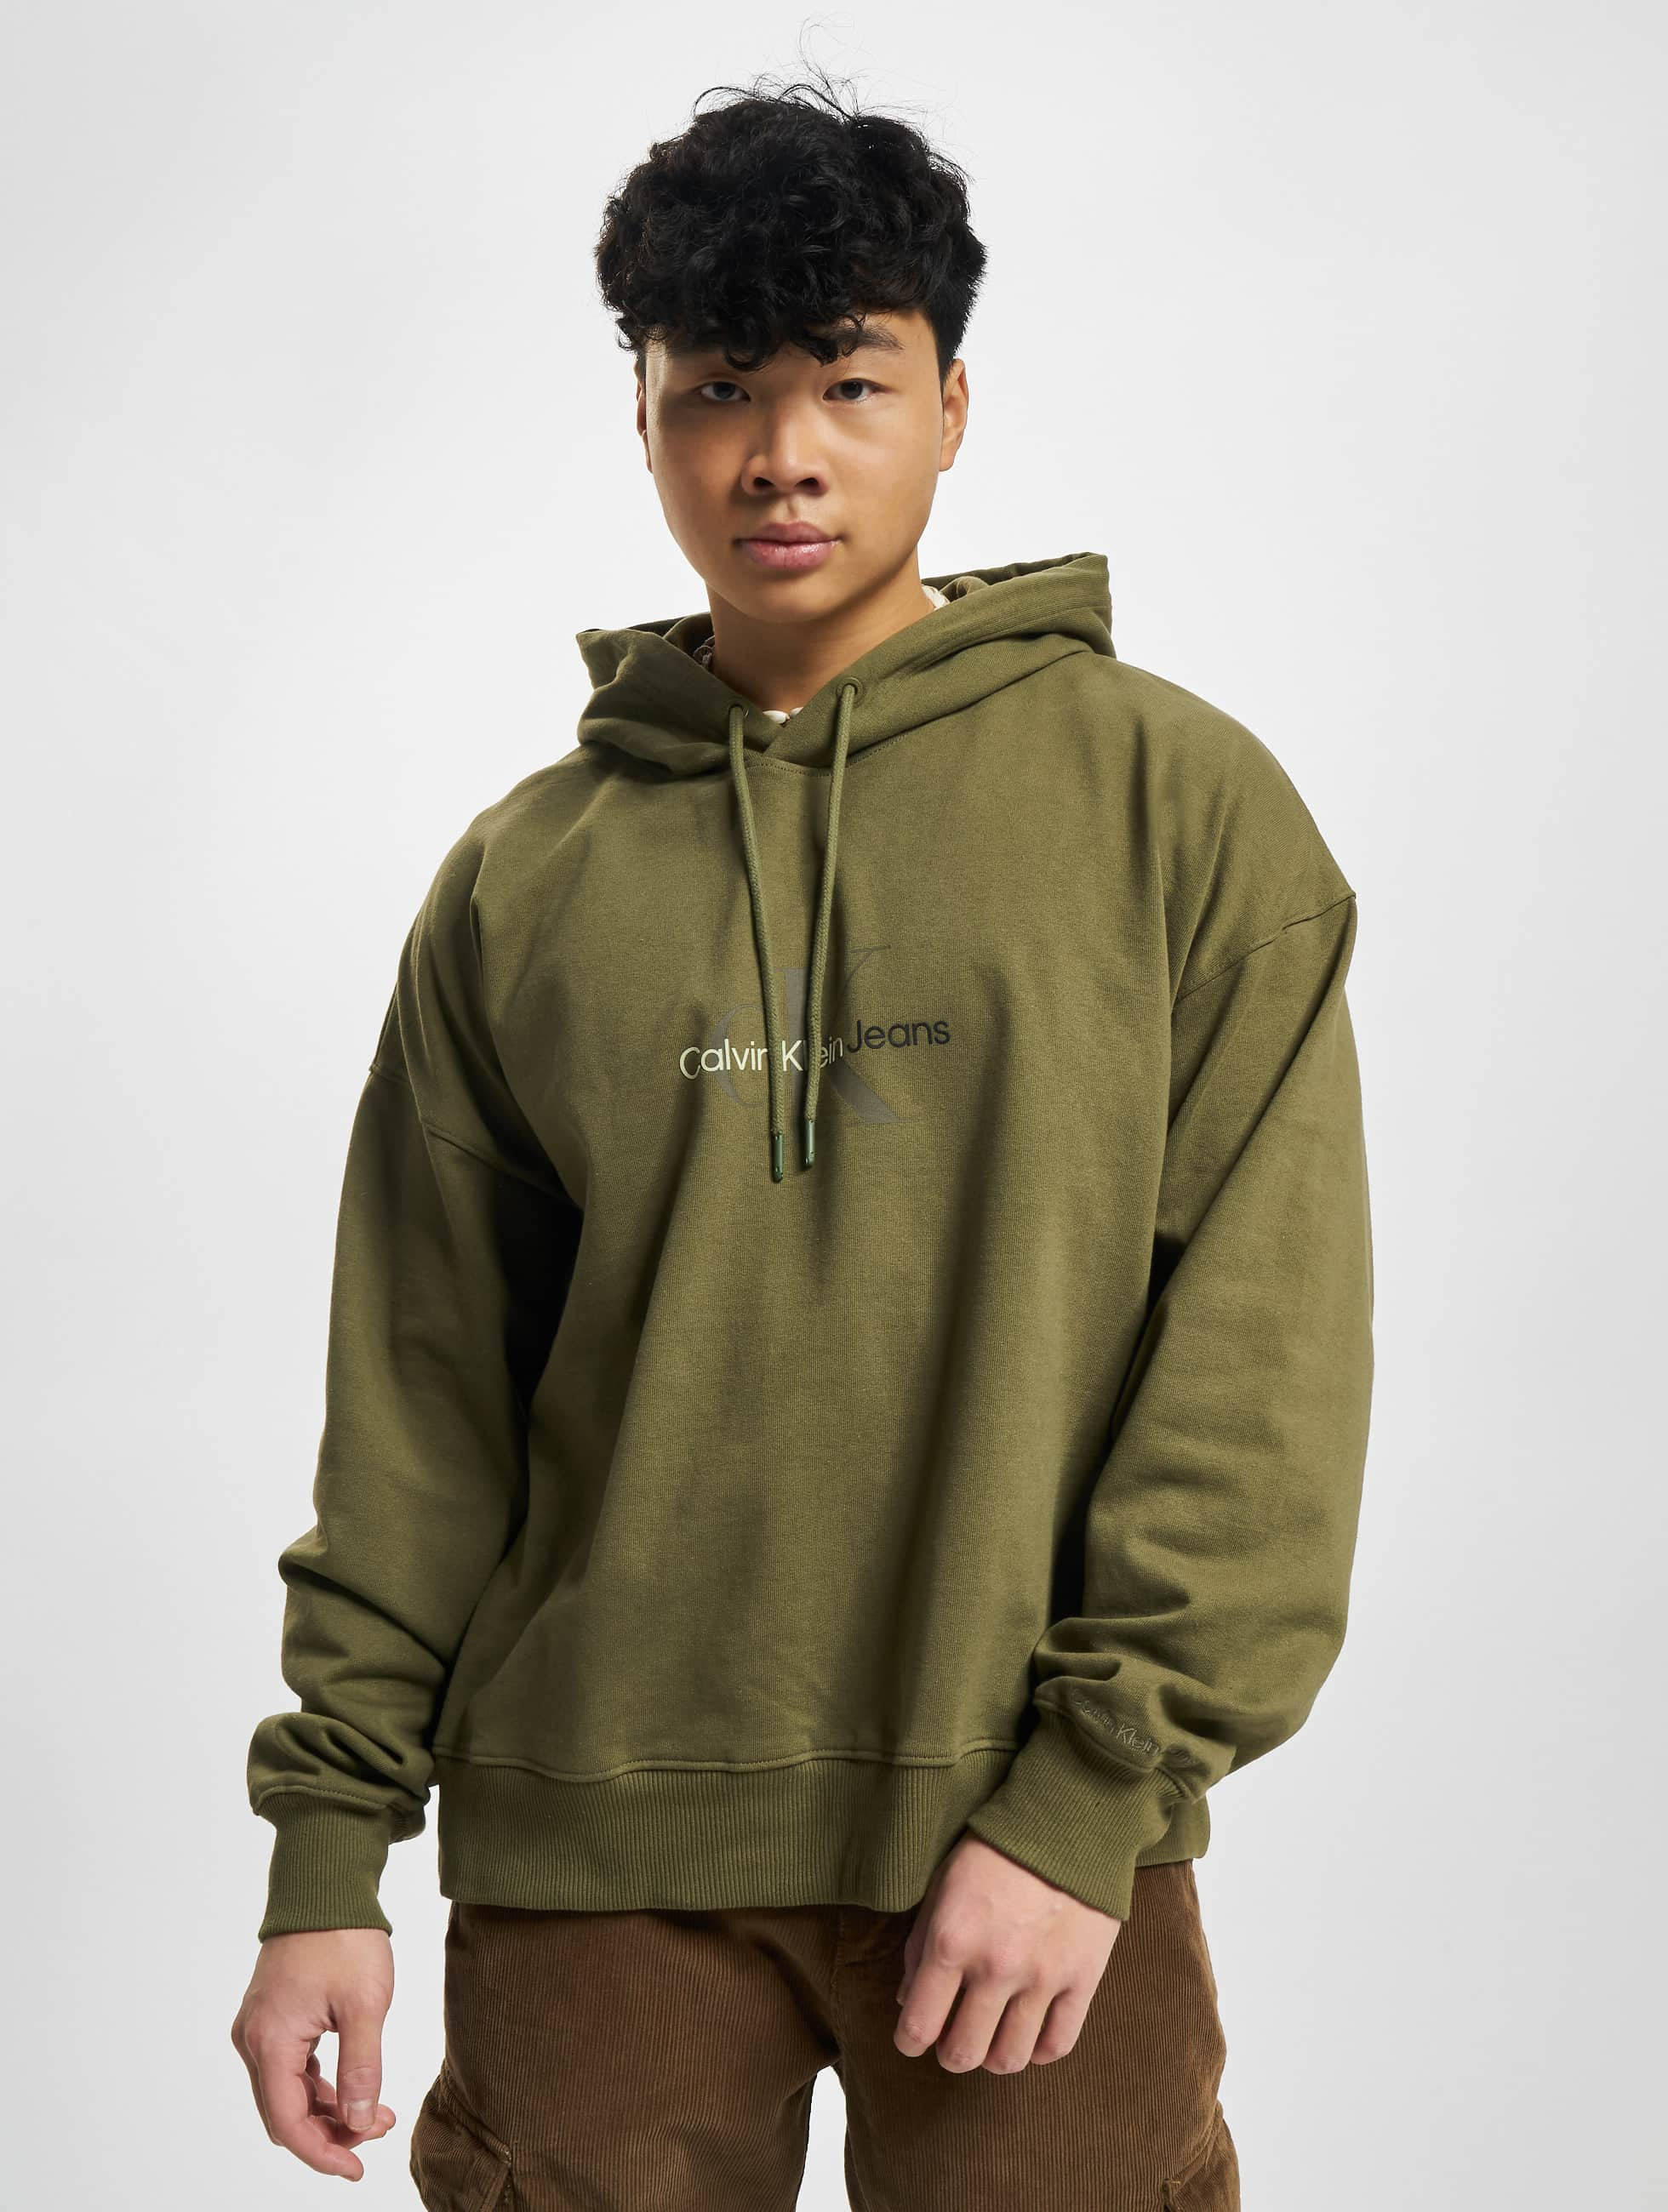 Calvin Klein Overwear / Hoodie Natural Washed in olive 983011